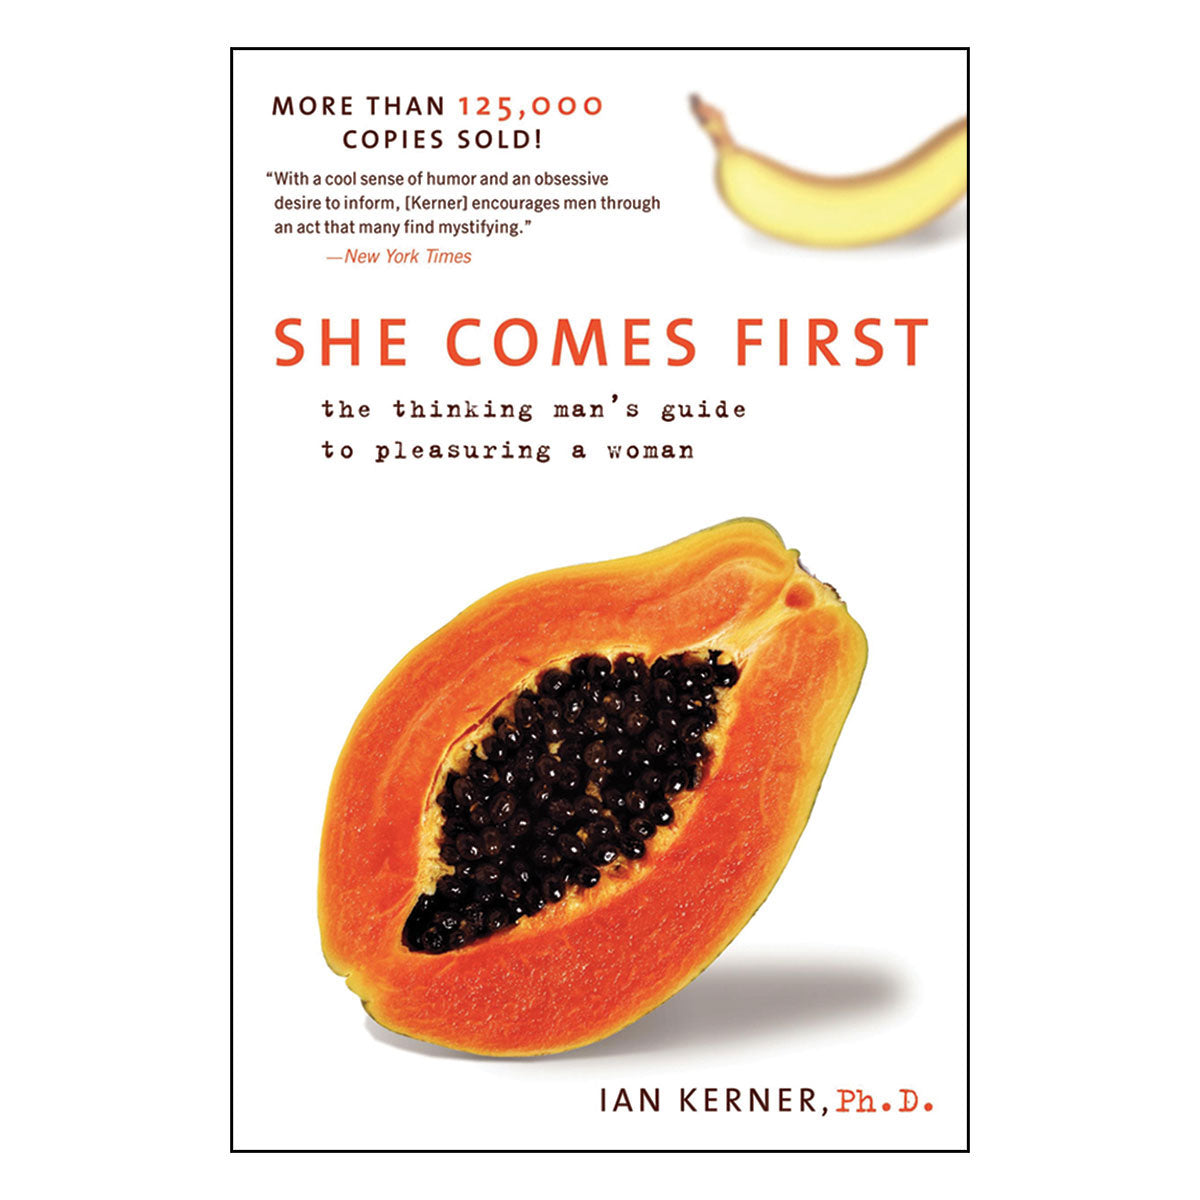 She Comes First: A Thinking Man's Guide To Pleasuring a Woman - Harper Collins